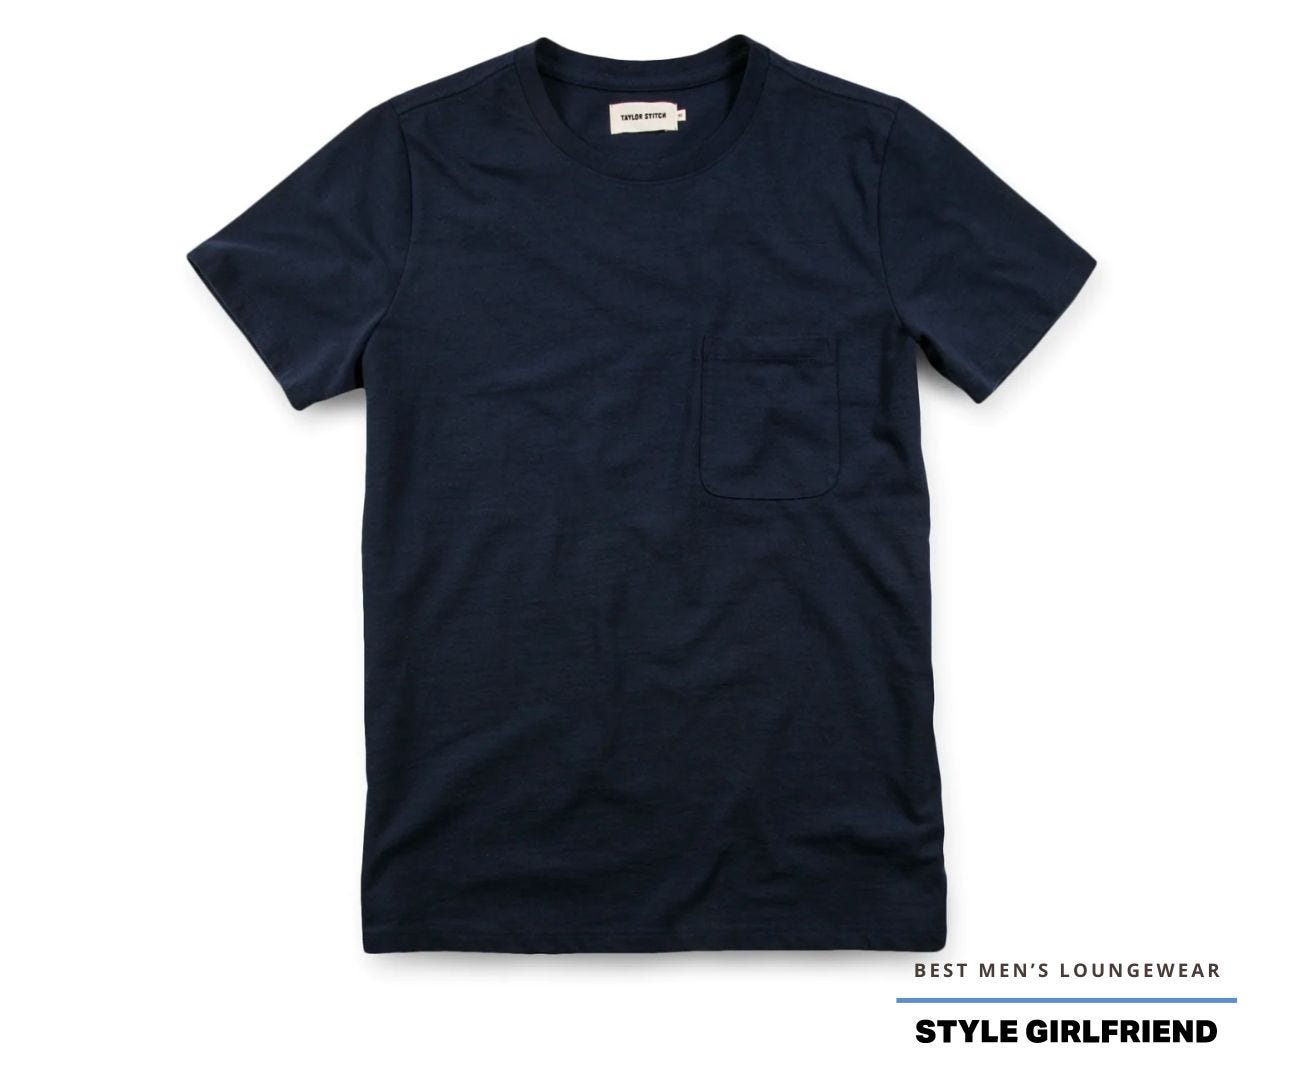 taylor stitch heavy bag tee in navy